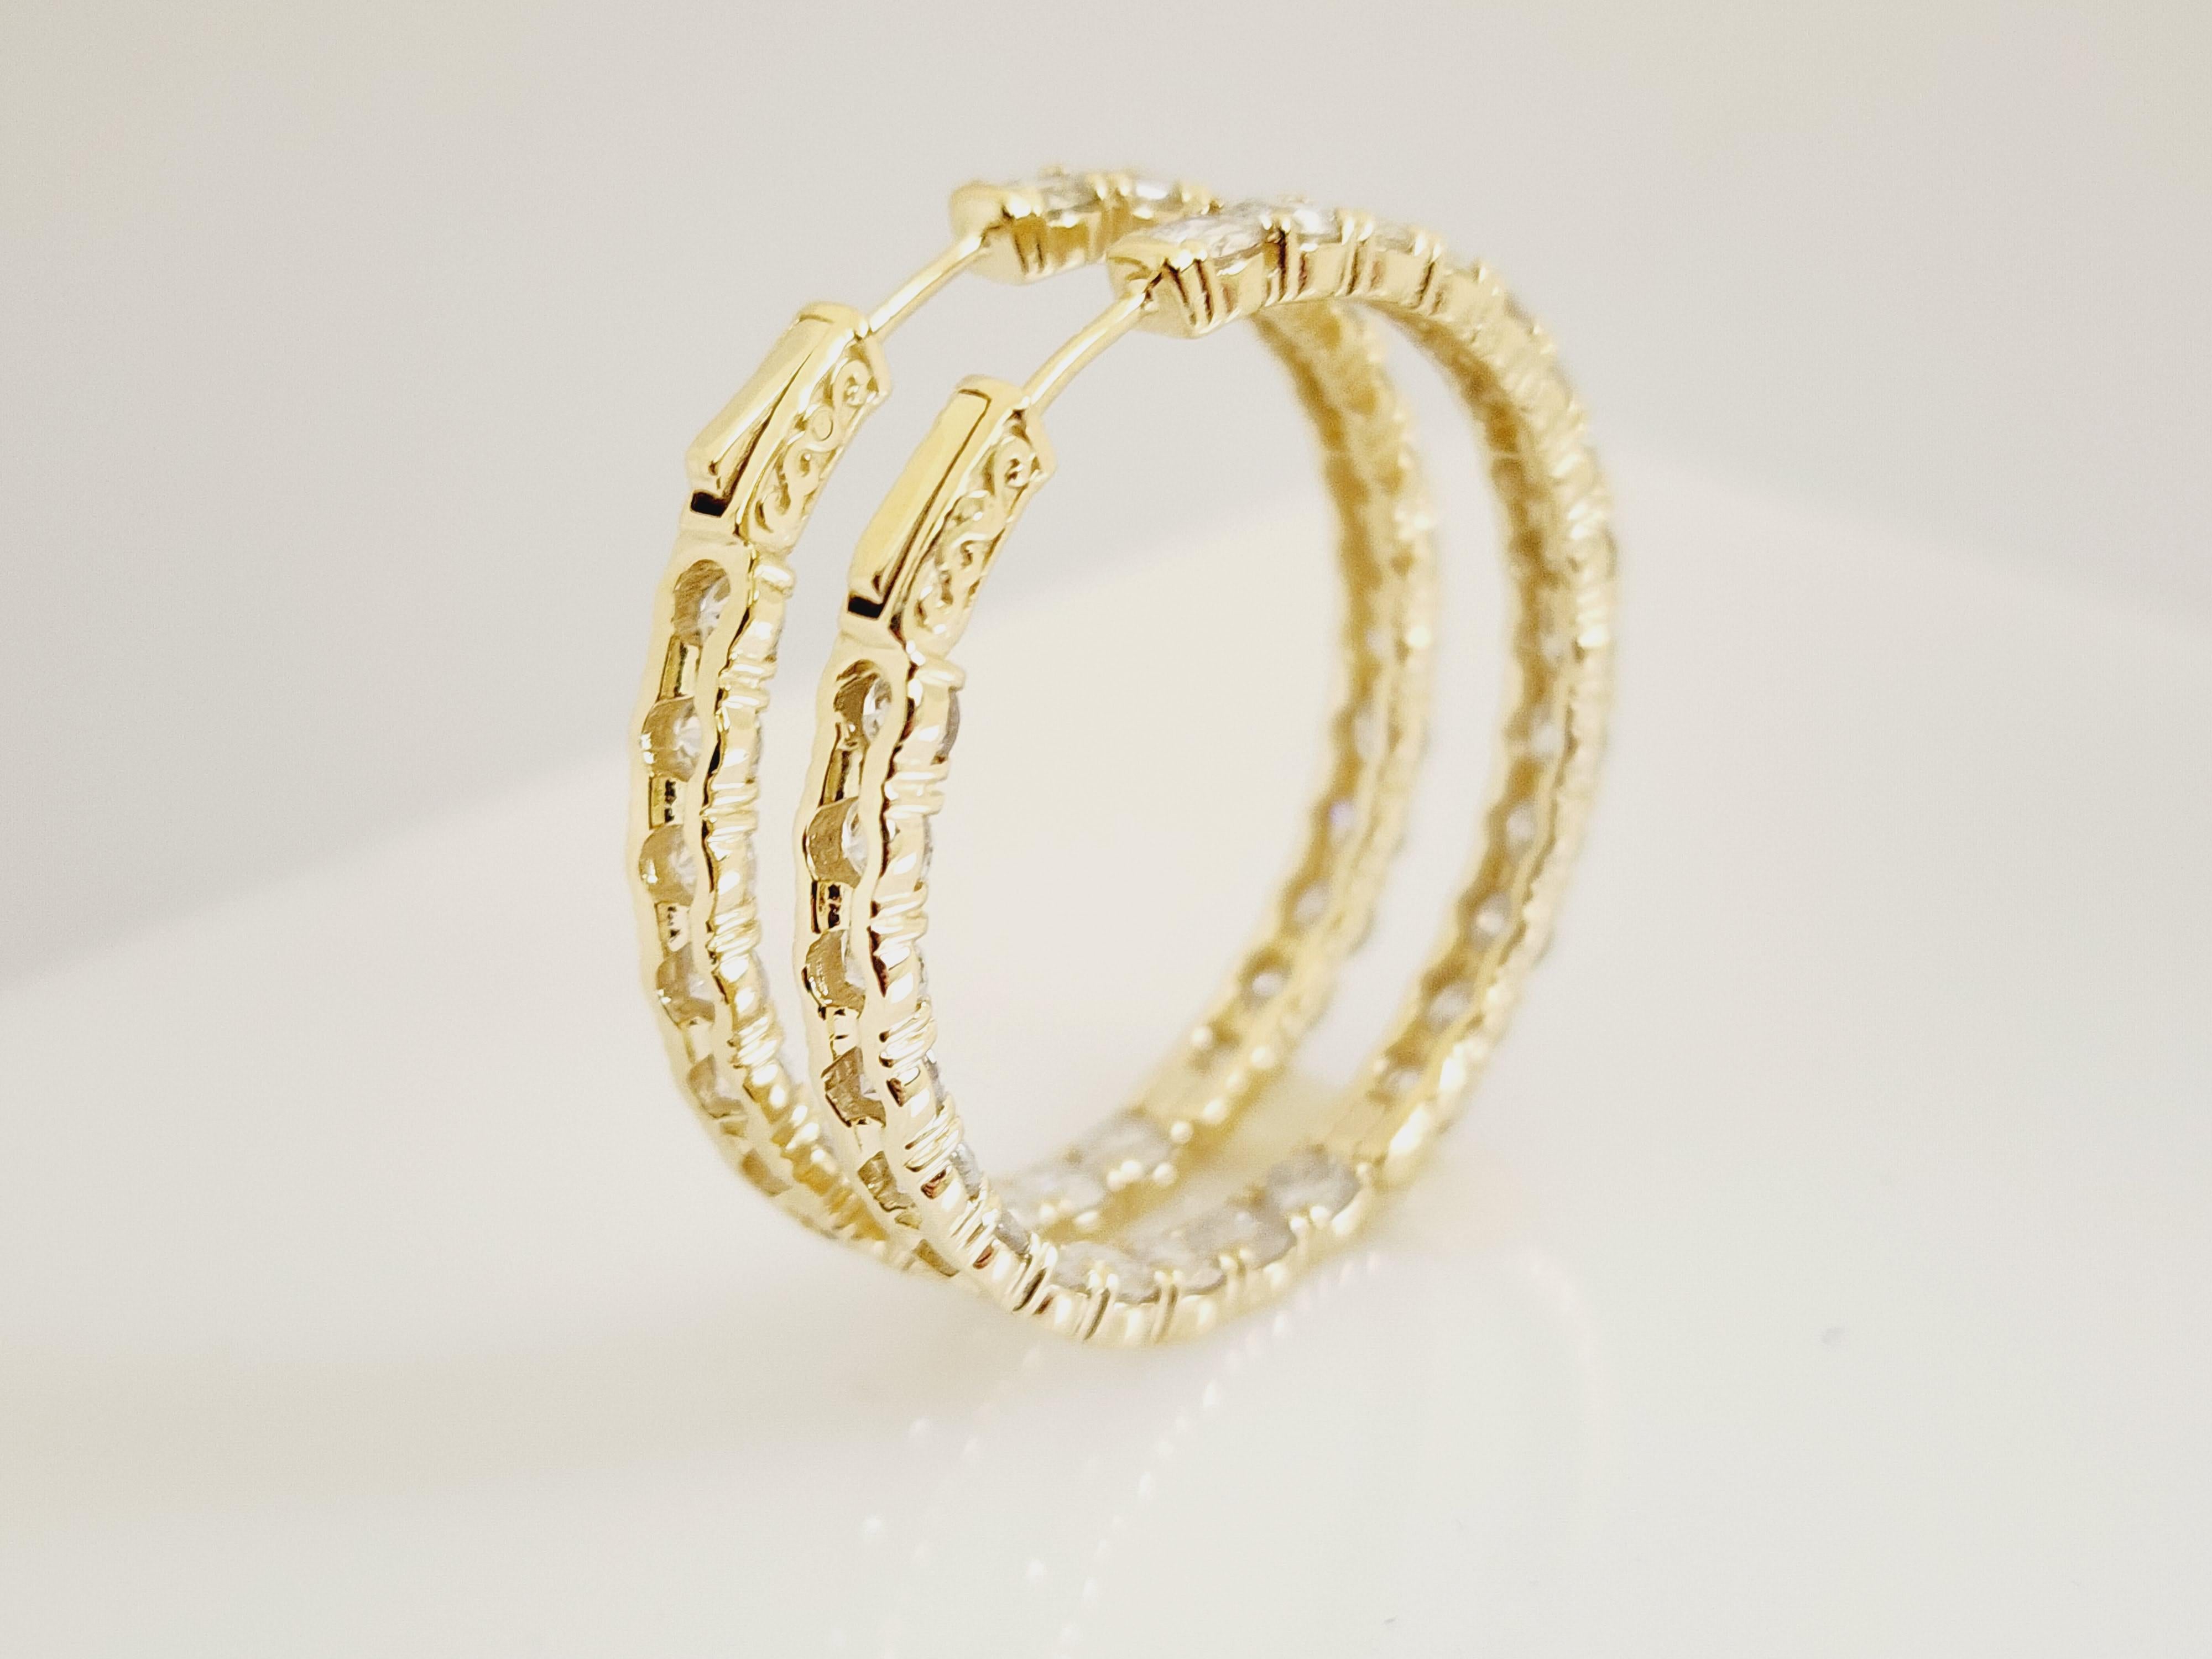 10.1 Carat Diamond Hoops Earrings 14 Karat Yellow Gold In New Condition For Sale In Great Neck, NY